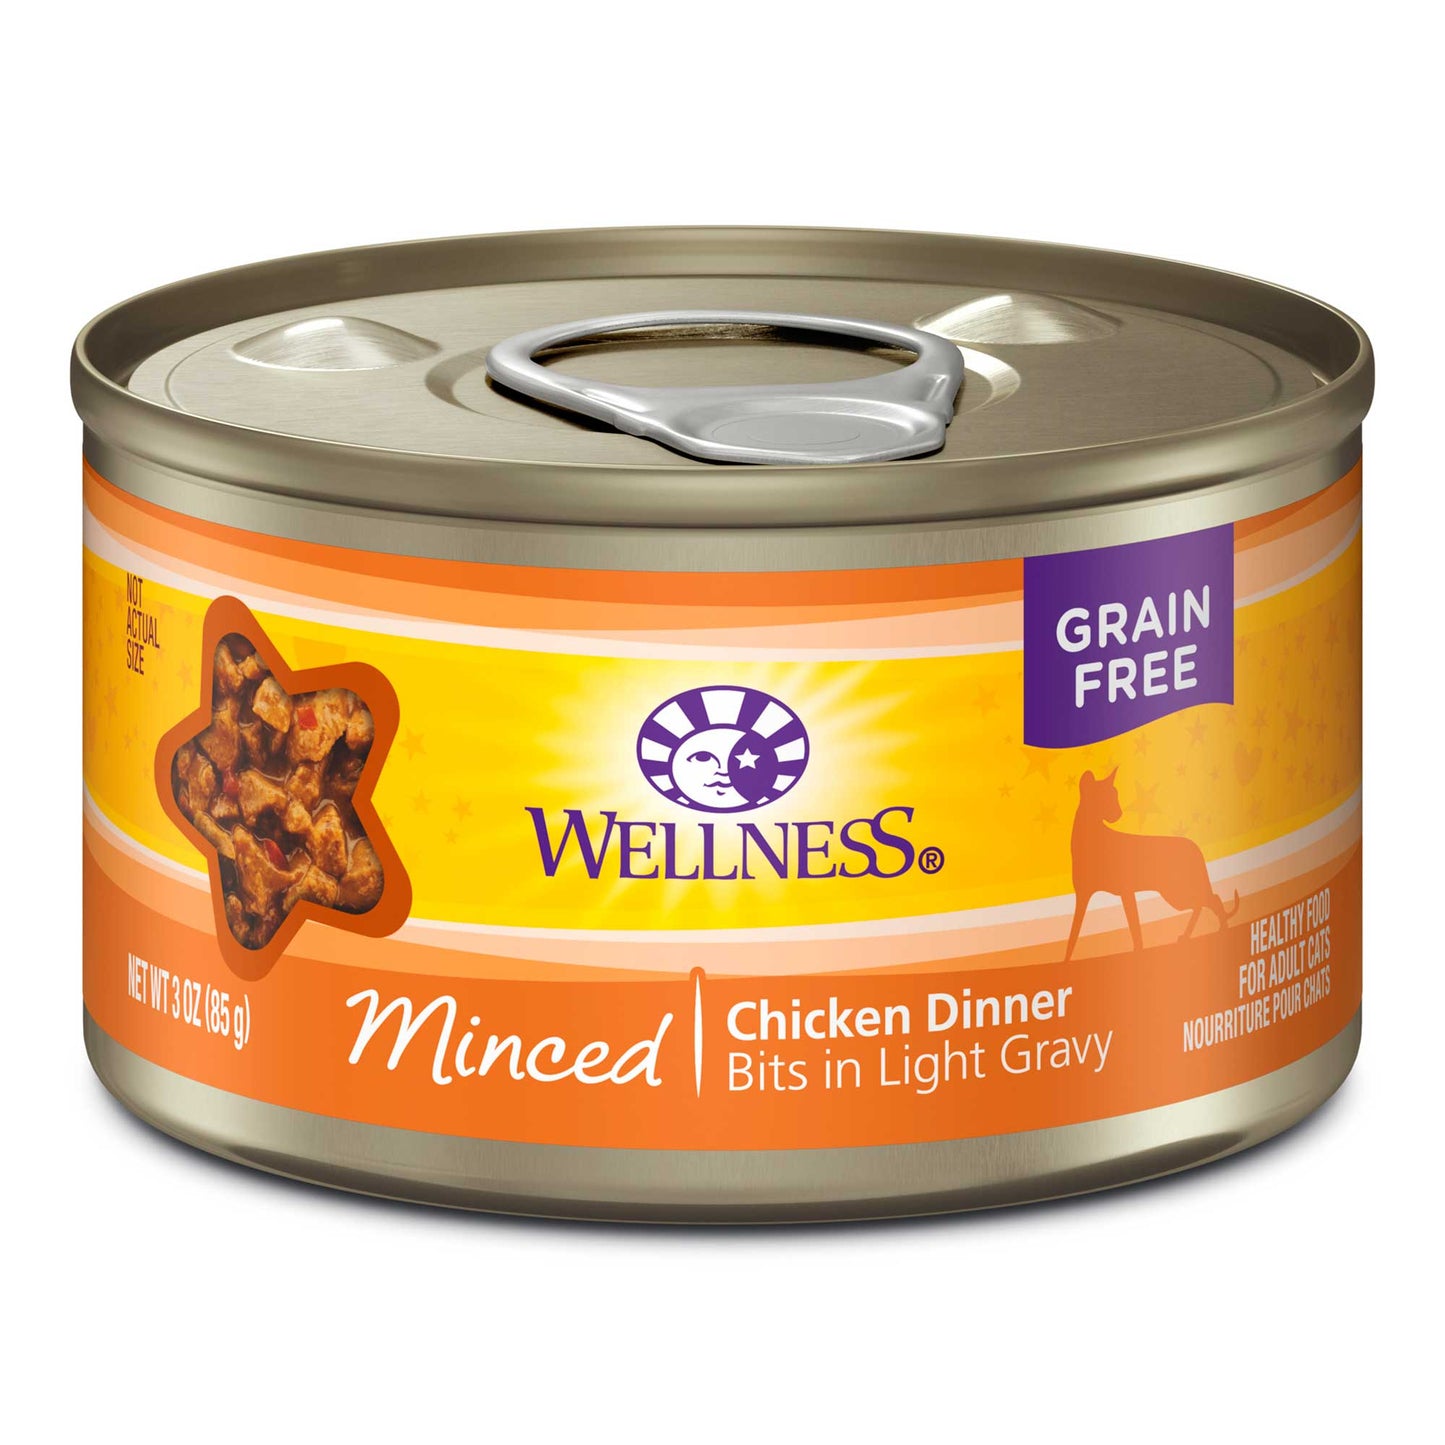 Wellness Complete Health Minced Grain Free Canned Cat Food Chicken Dinner 3ozs